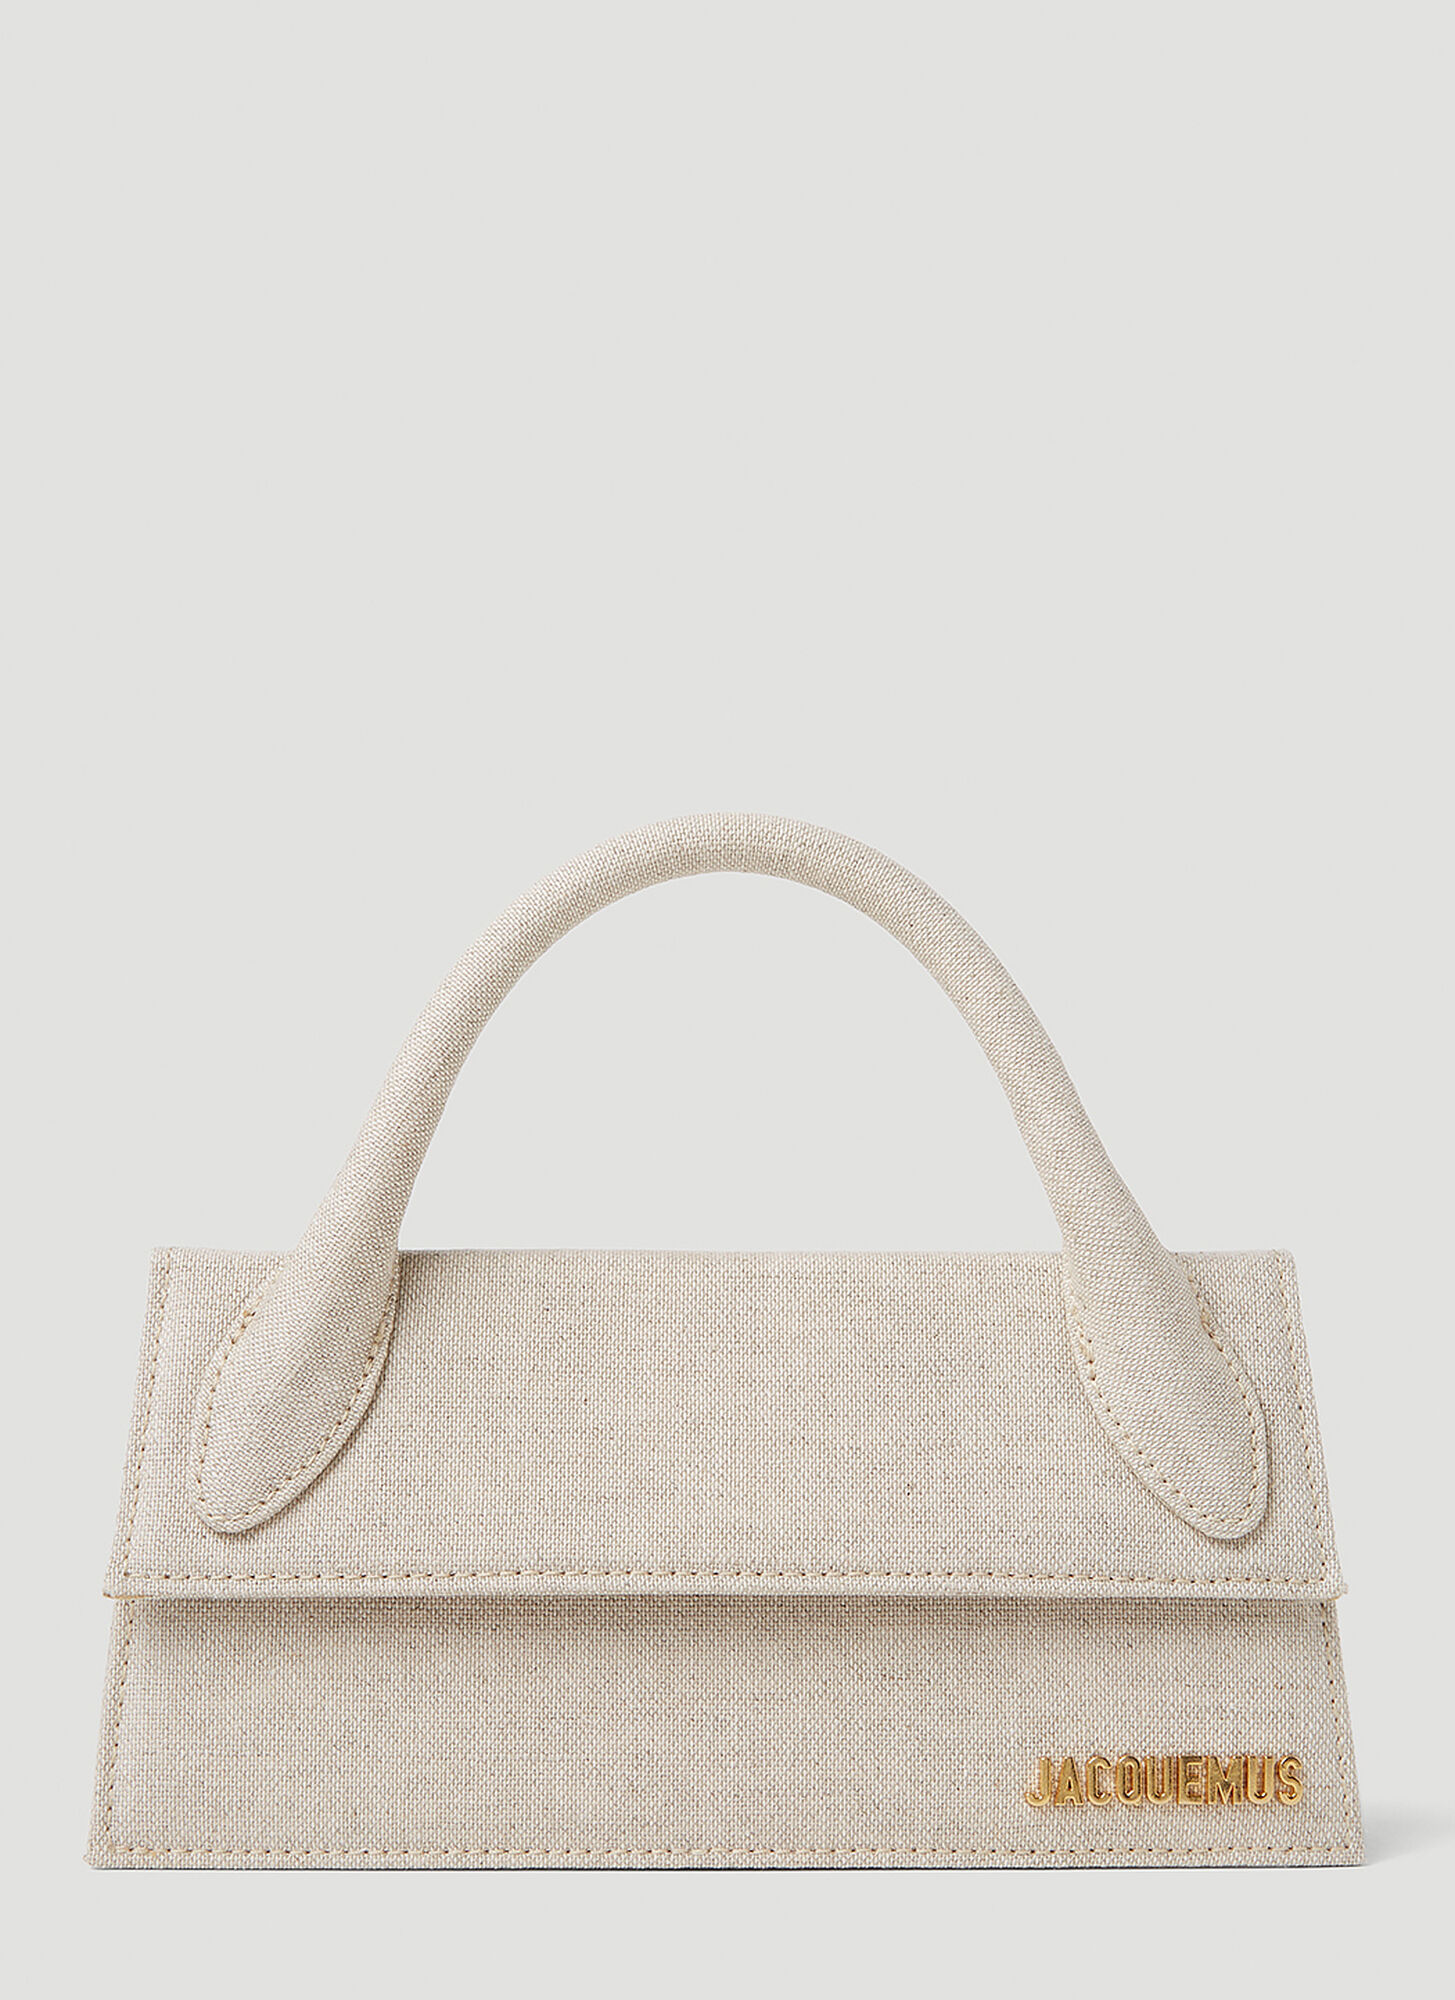 Jacquemus Le Chiquito Long Bag In Beige